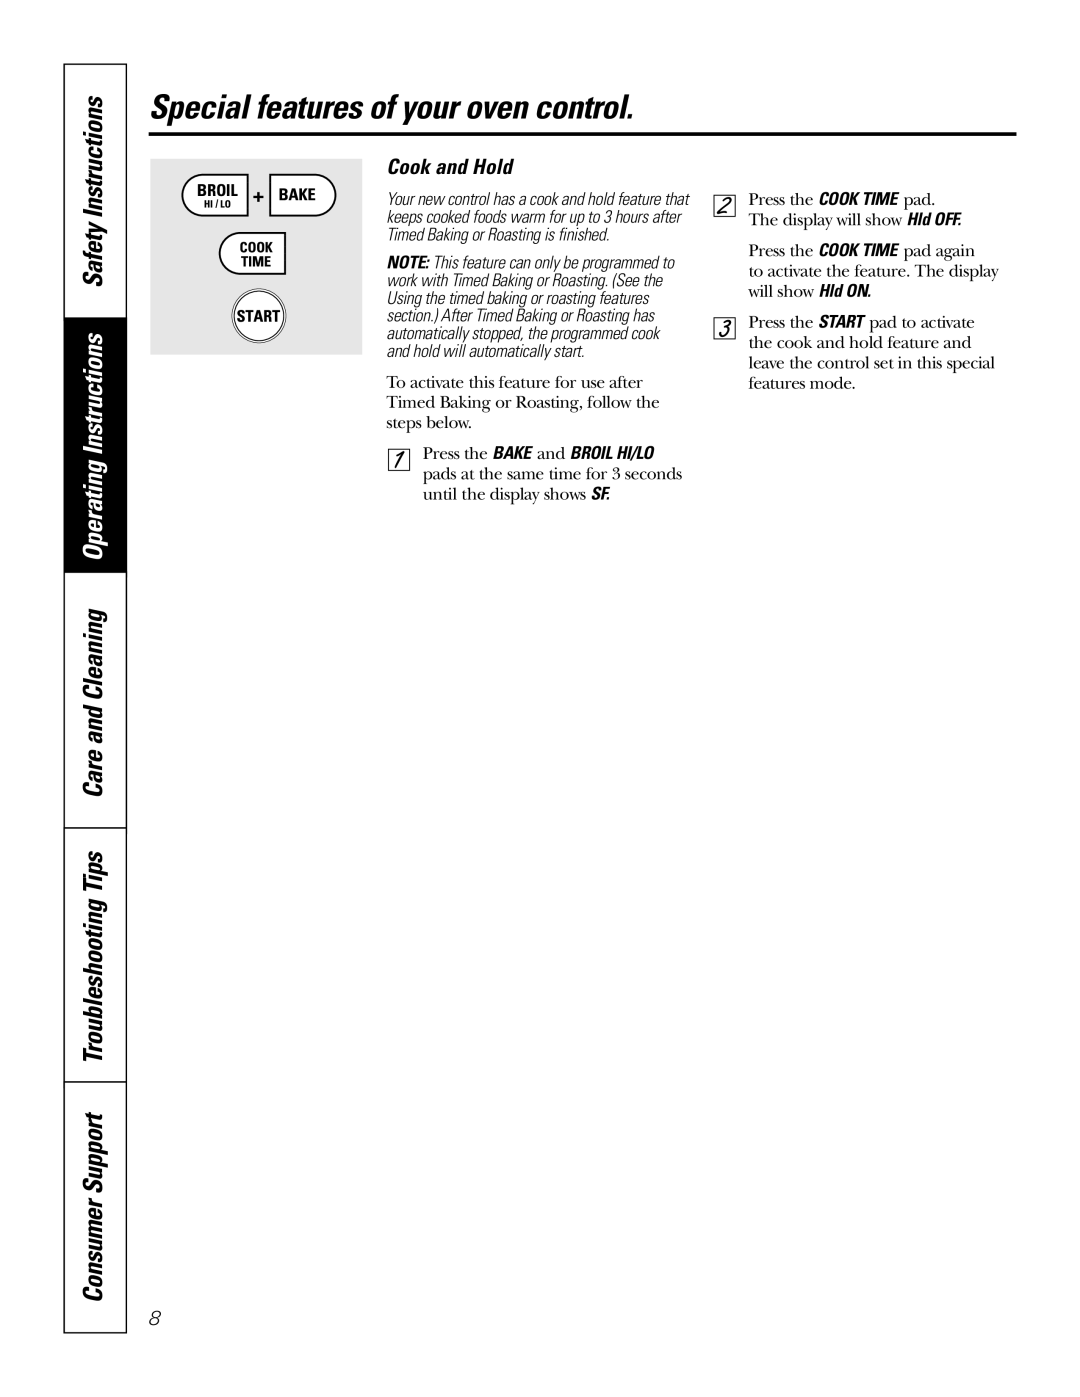 GE JT952SKSS owner manual Instructions, Cook and Hold, Special features of your oven control 